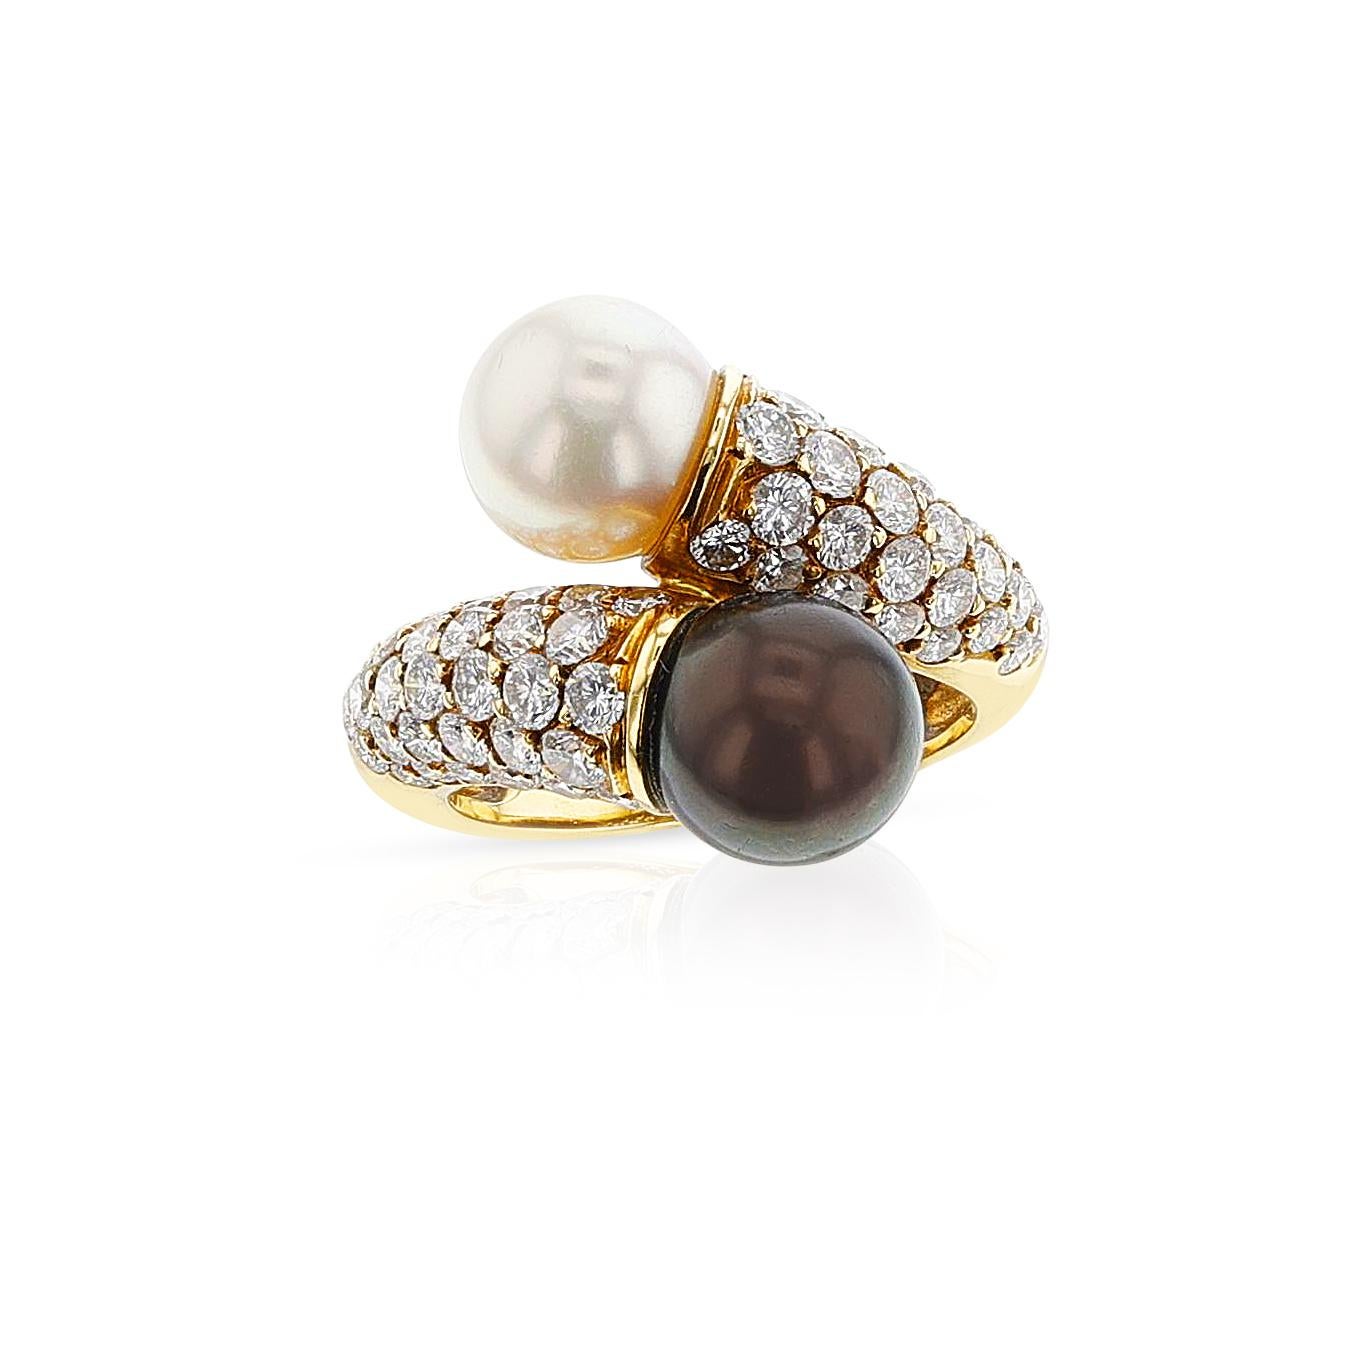 Round Cut Van Cleef & Arpels Toi Et Moi Pearl Ring with Diamonds, 18k For Sale